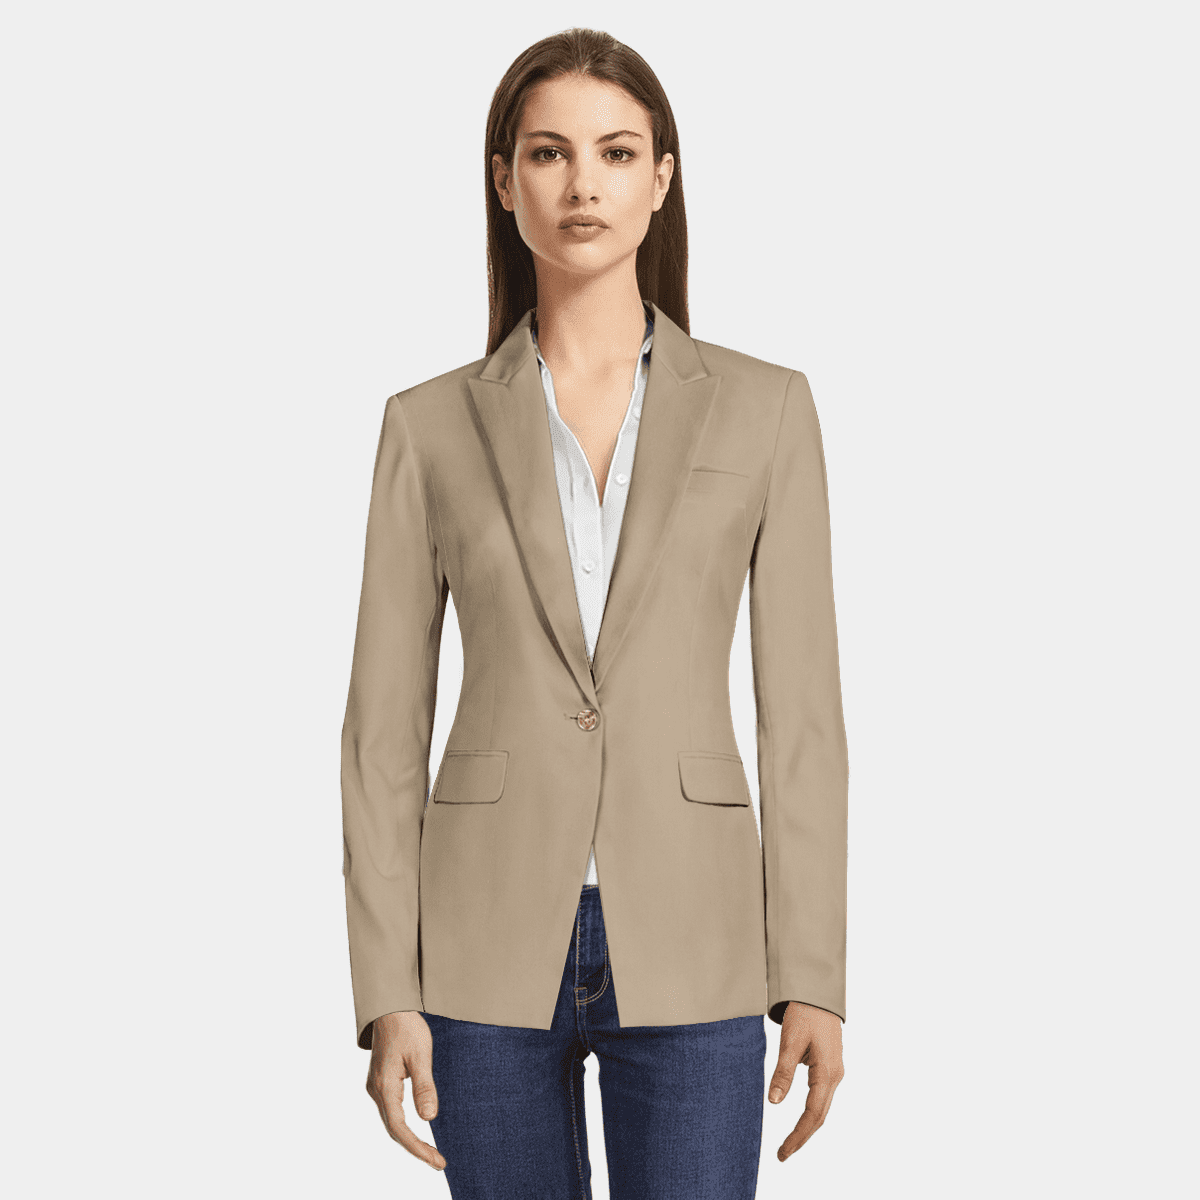 What to Wear with a Blazer: 4 Classy Blazer Outfits for Women - Sumissura